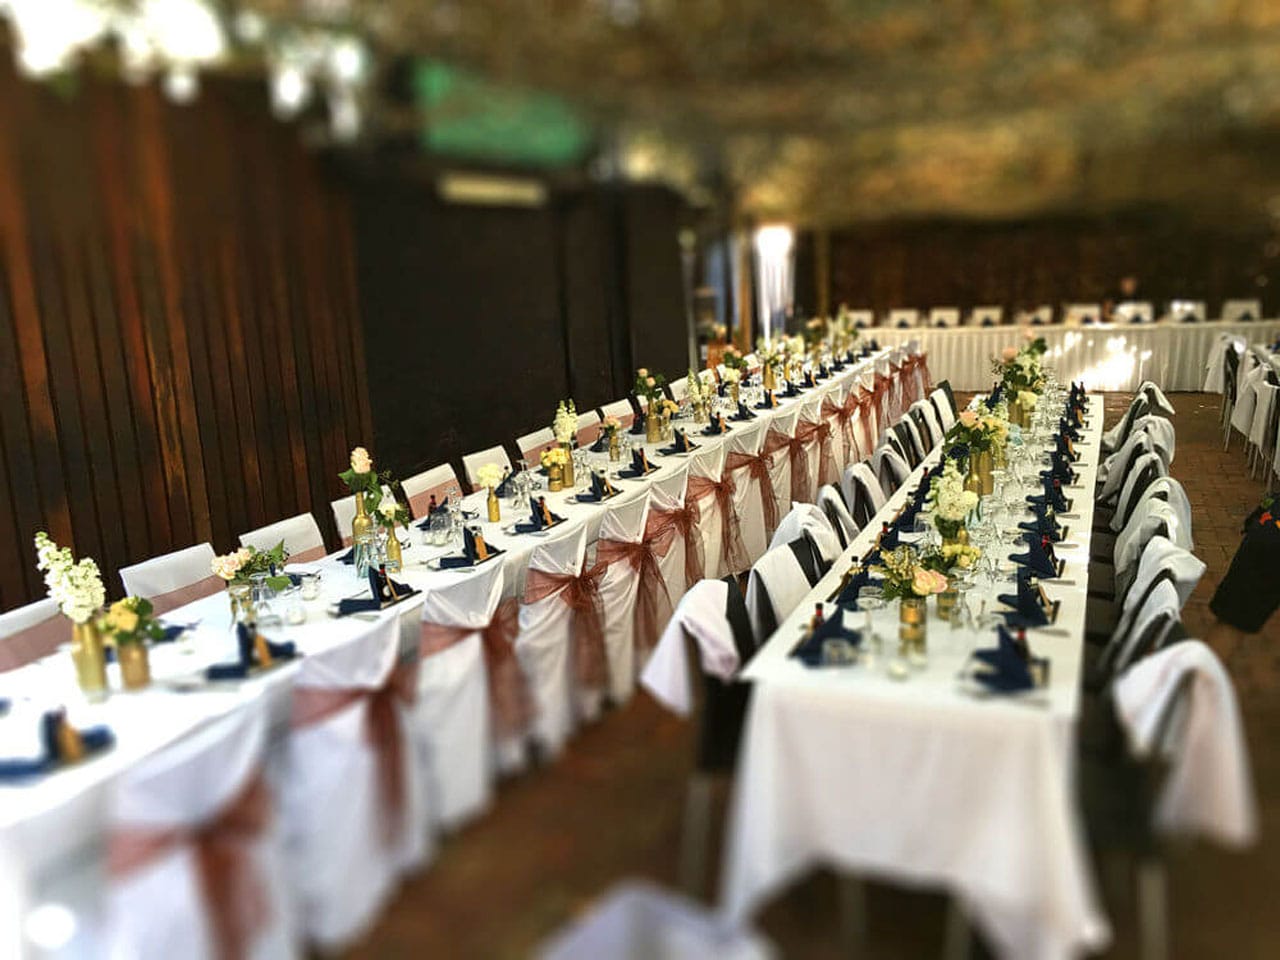 Long Tables Fully Set With Cutlery and Green Napkins In The Open Air Function Space